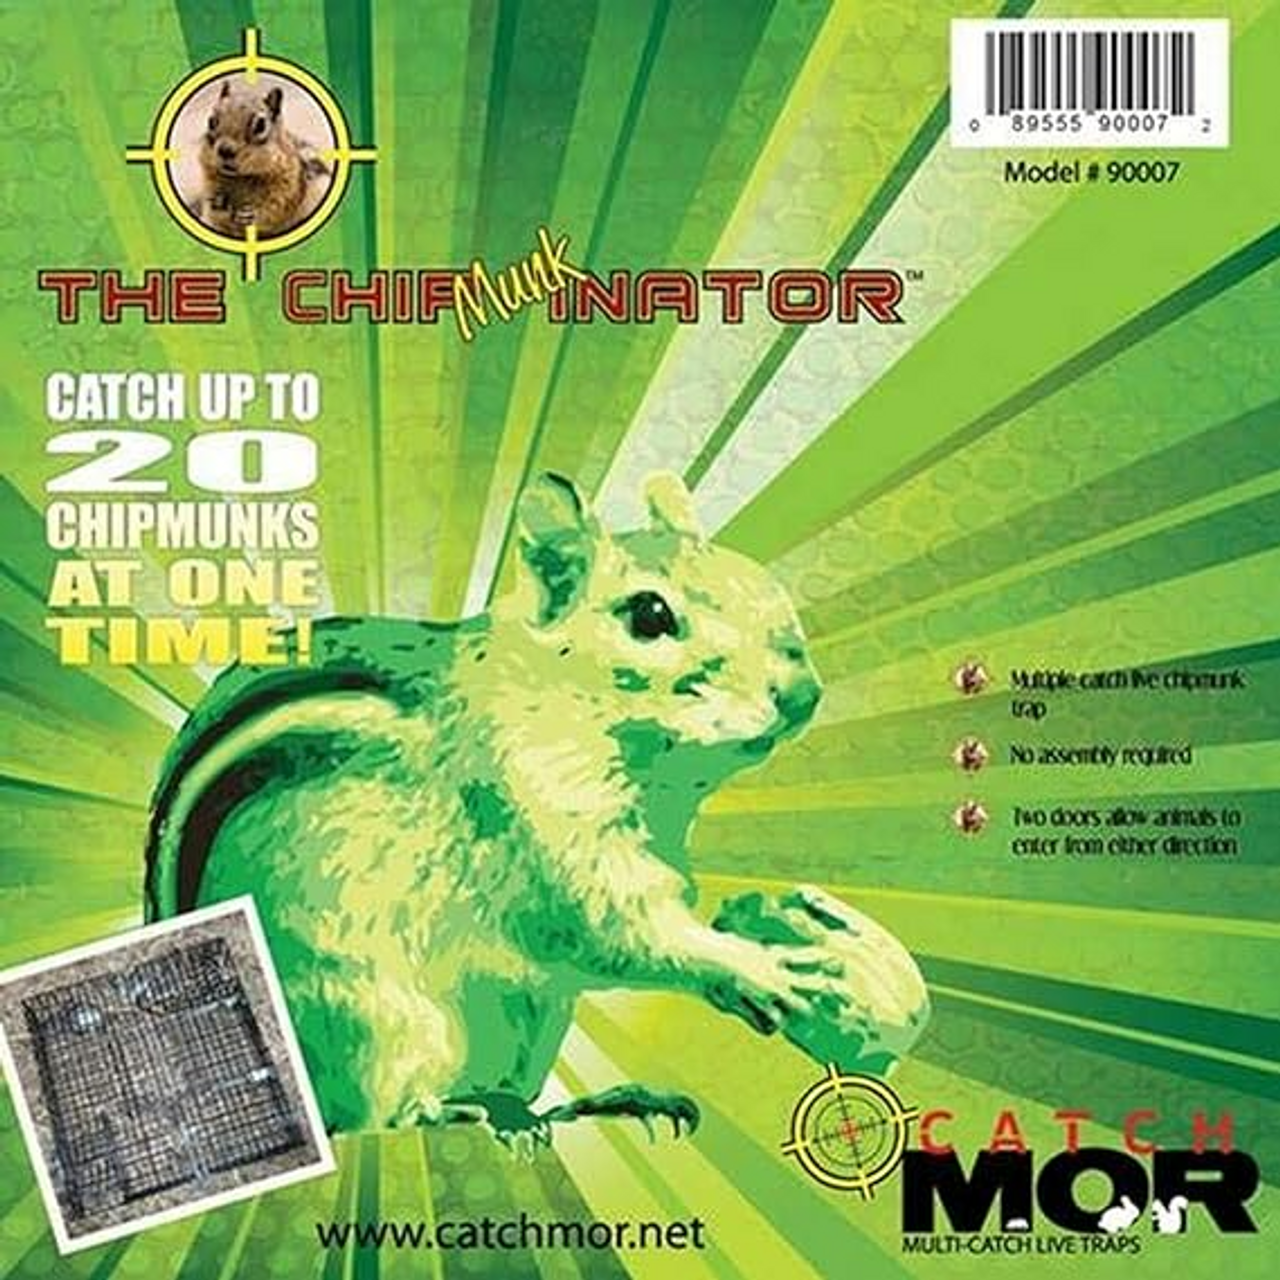 Rugged Ranch - The Ratinator Live Rat Trap